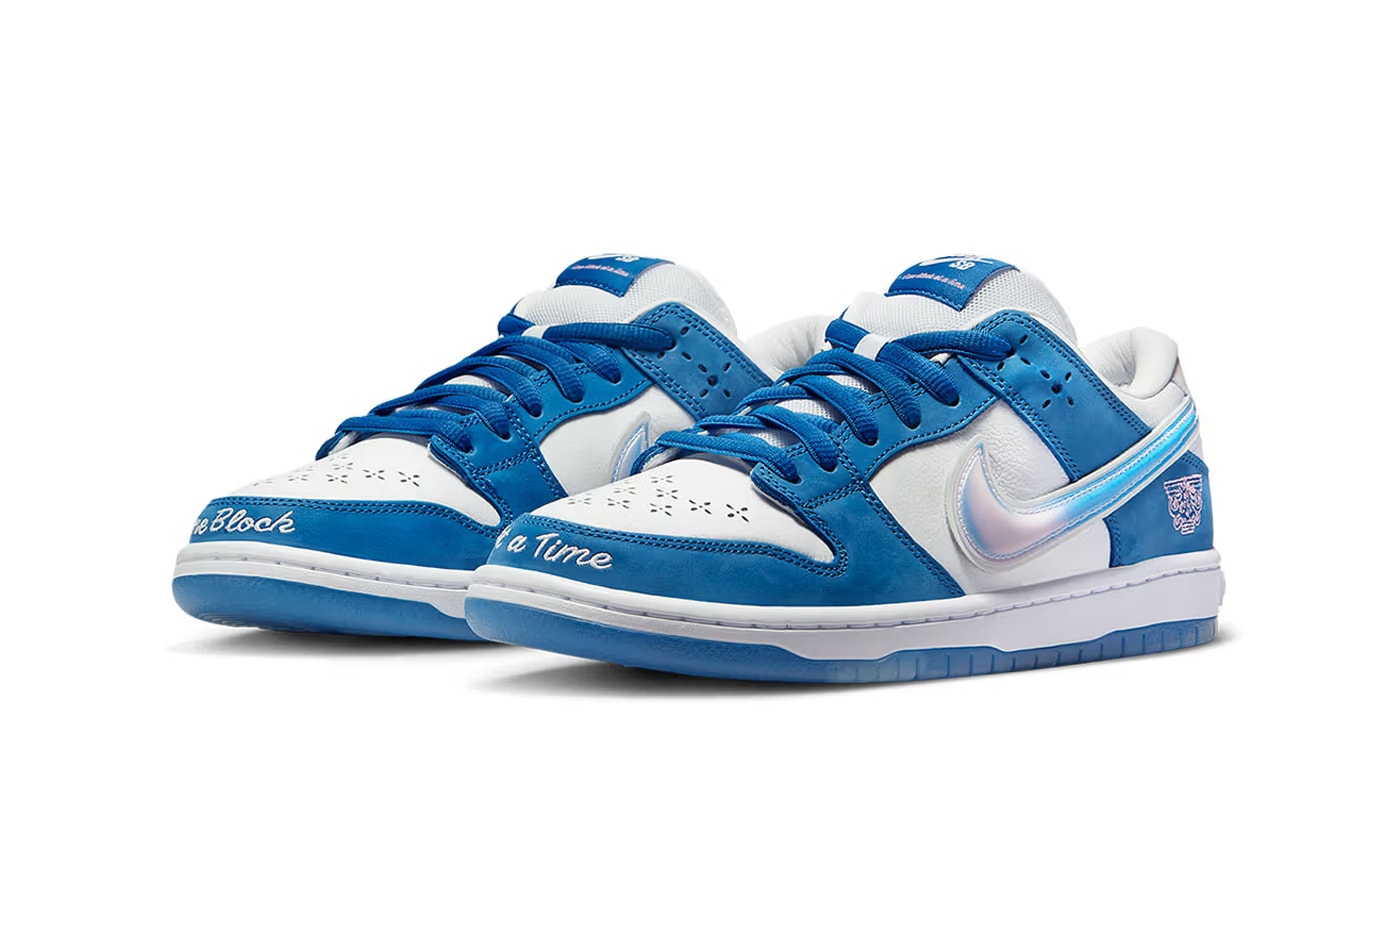 Release Delay for the Born x Raised x Nike SB Dunk Low